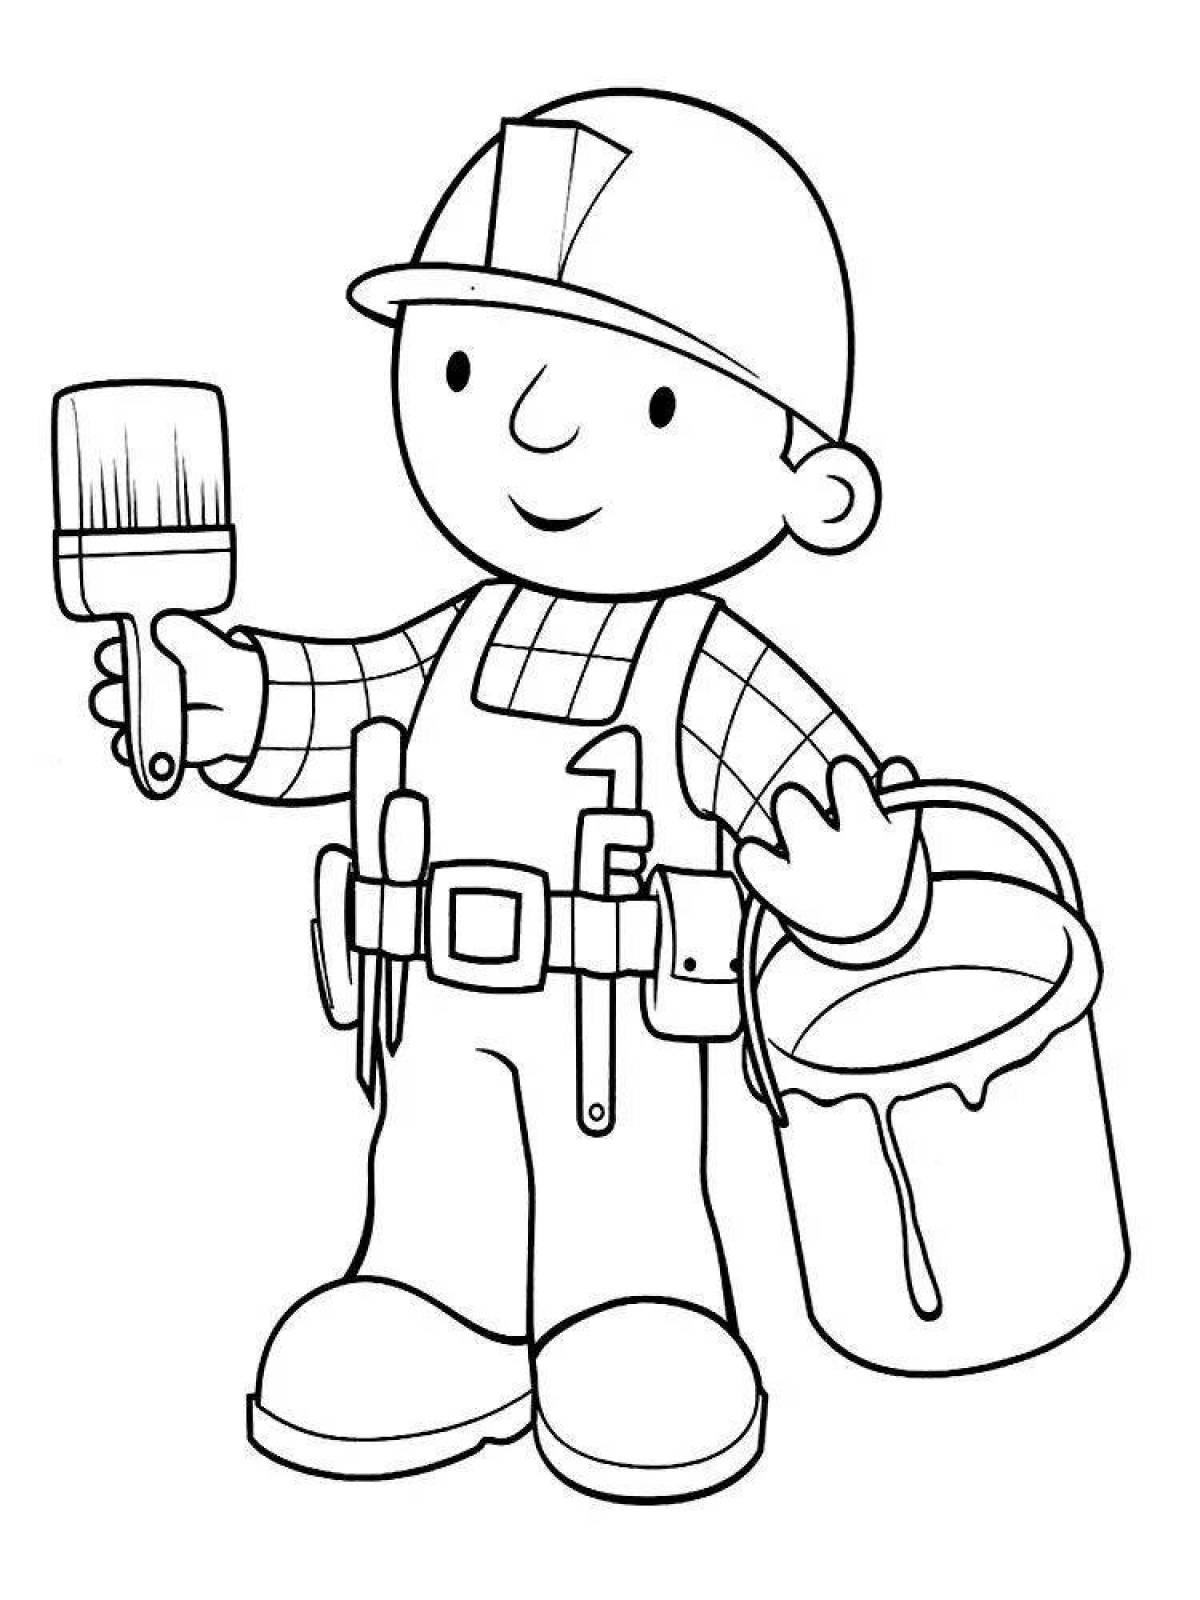 Colorful job coloring pages for wanderers